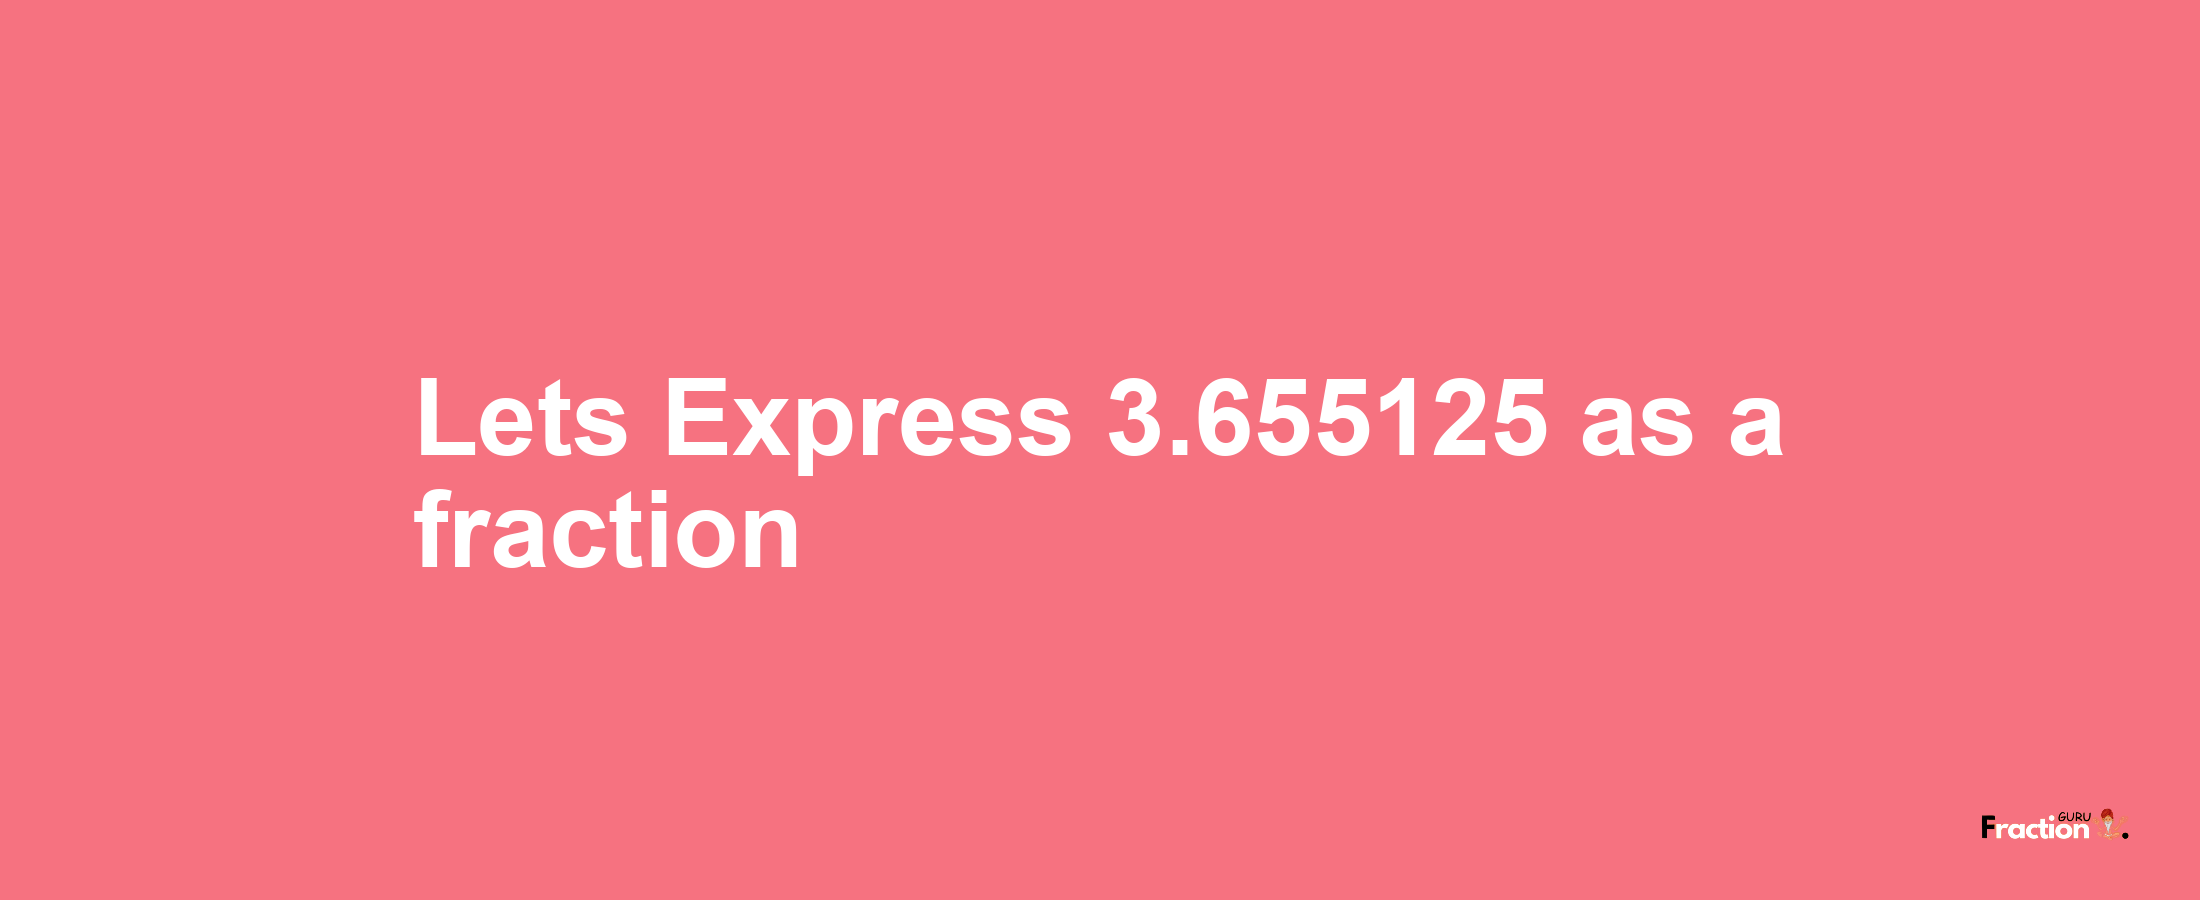 Lets Express 3.655125 as afraction